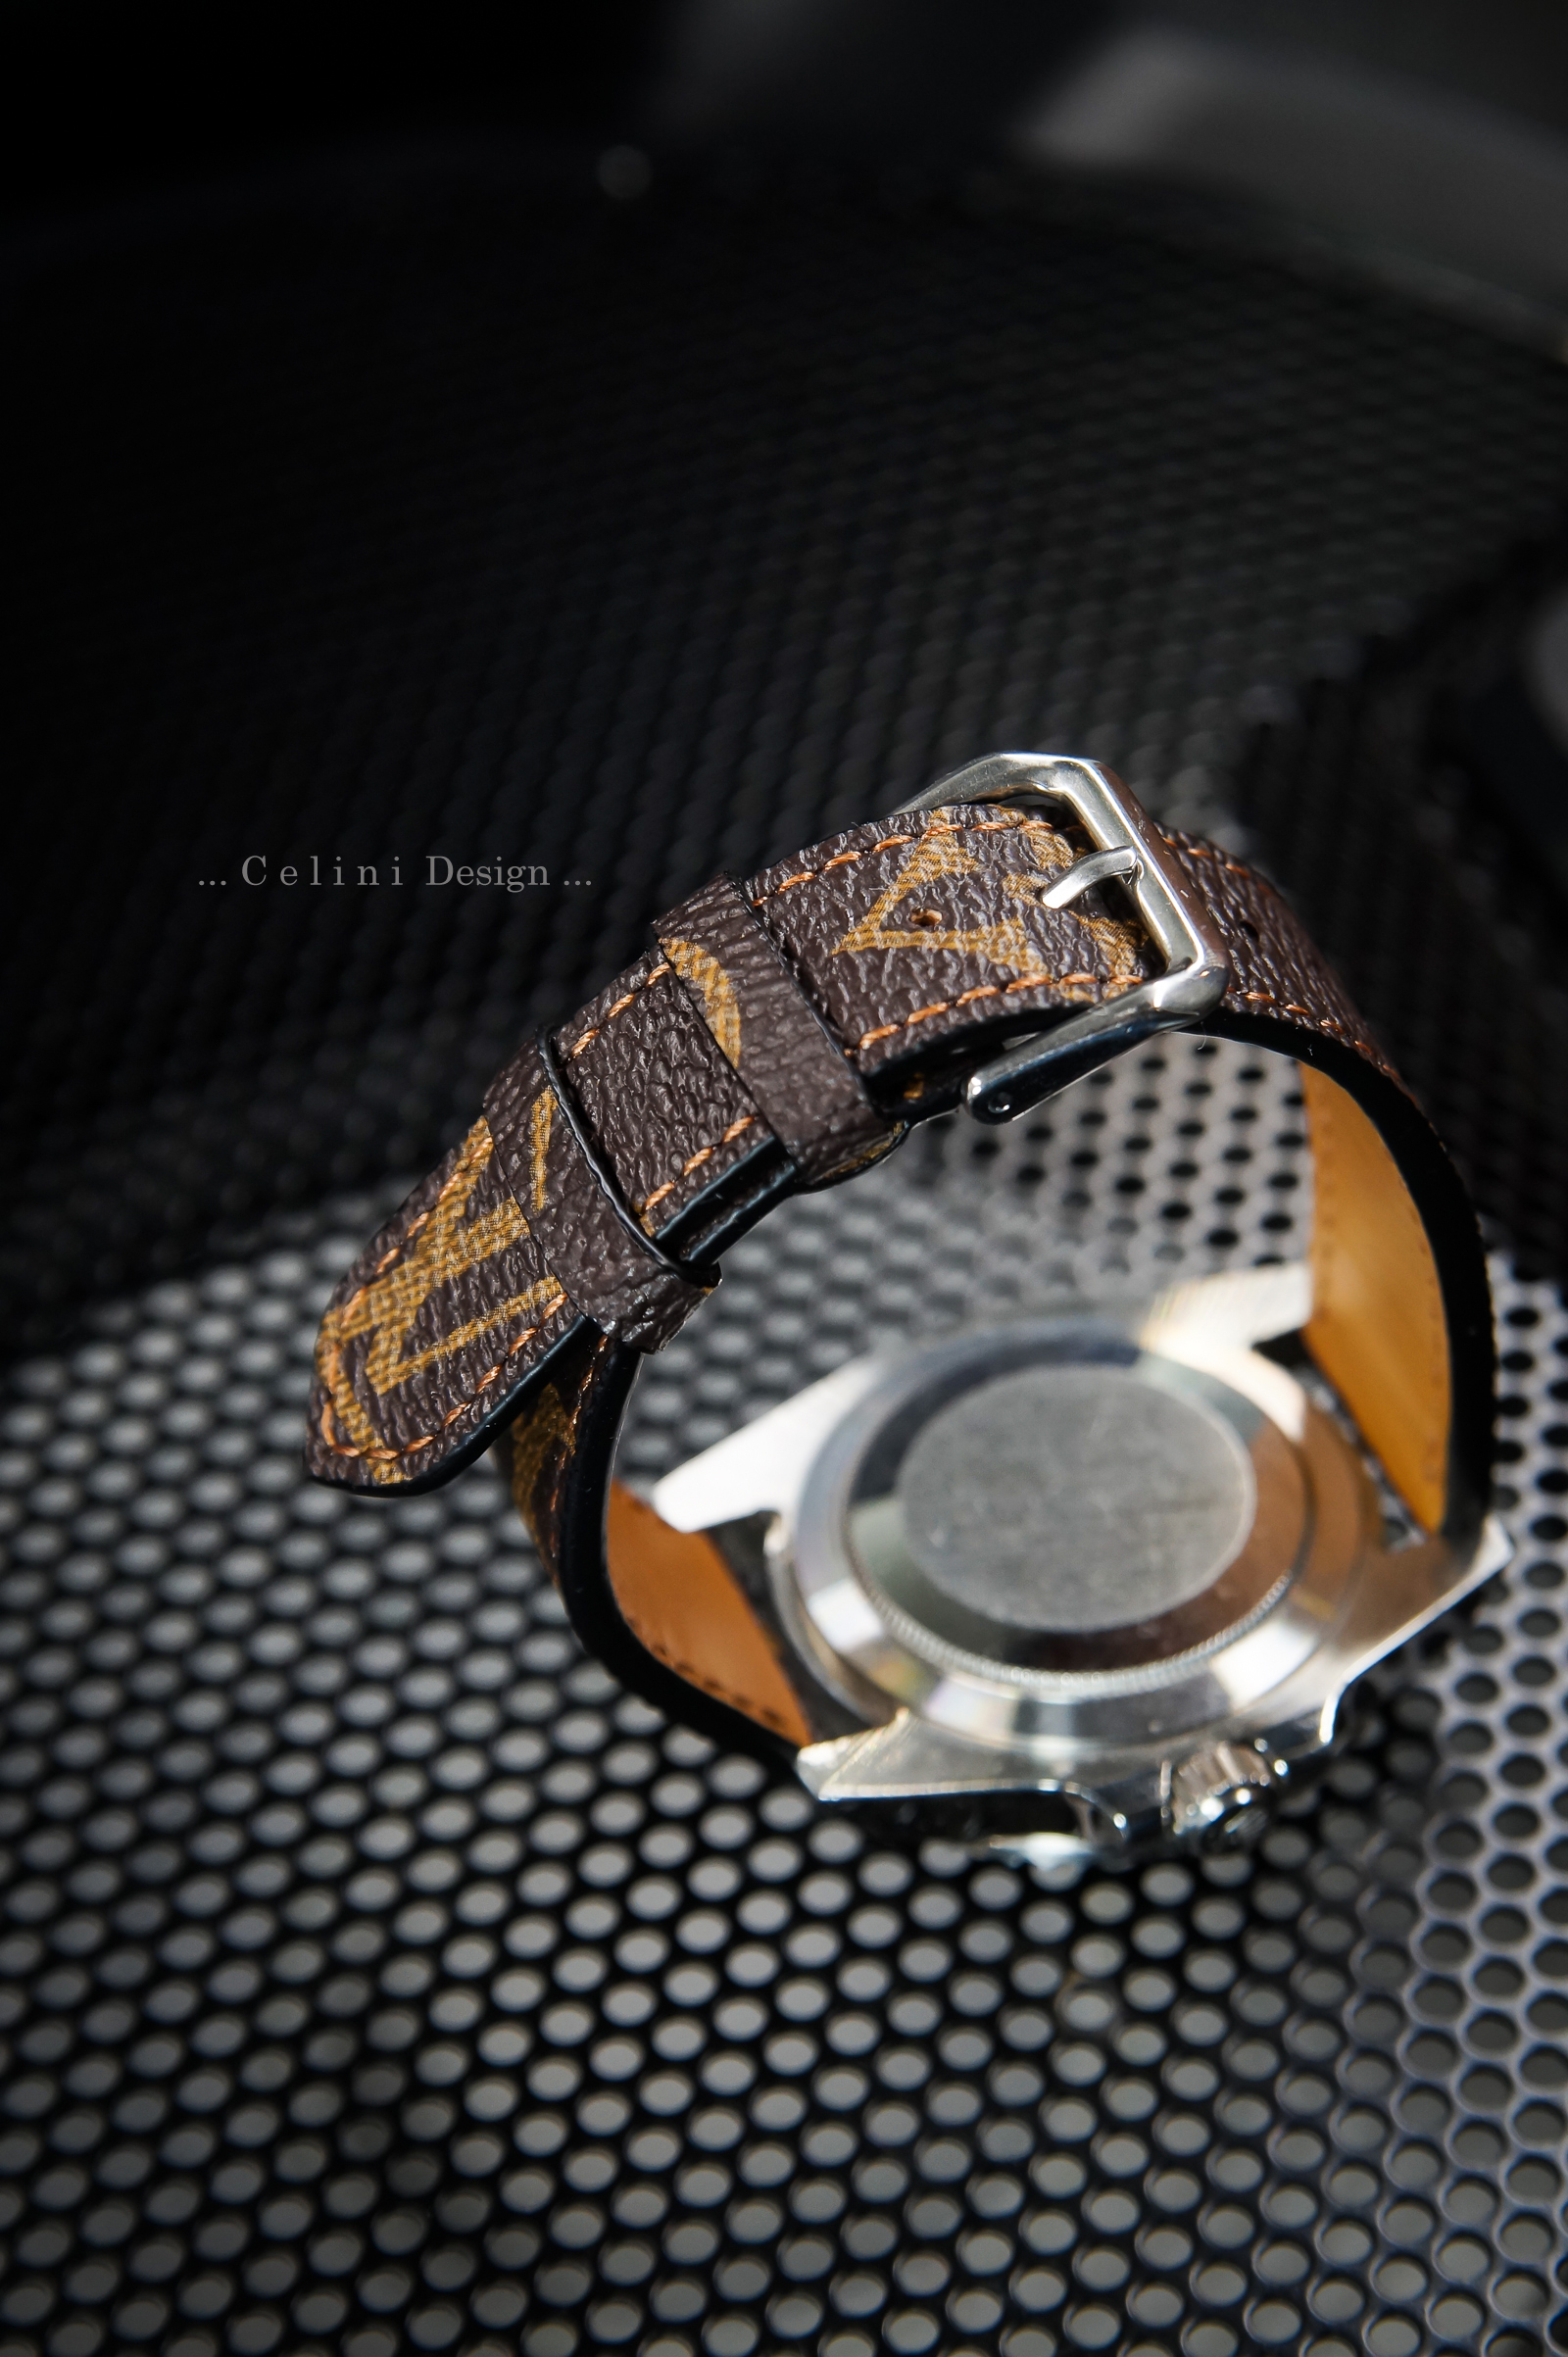 21x12mm Cowhide Leather Watchband for LV Strap Louis Vuitton